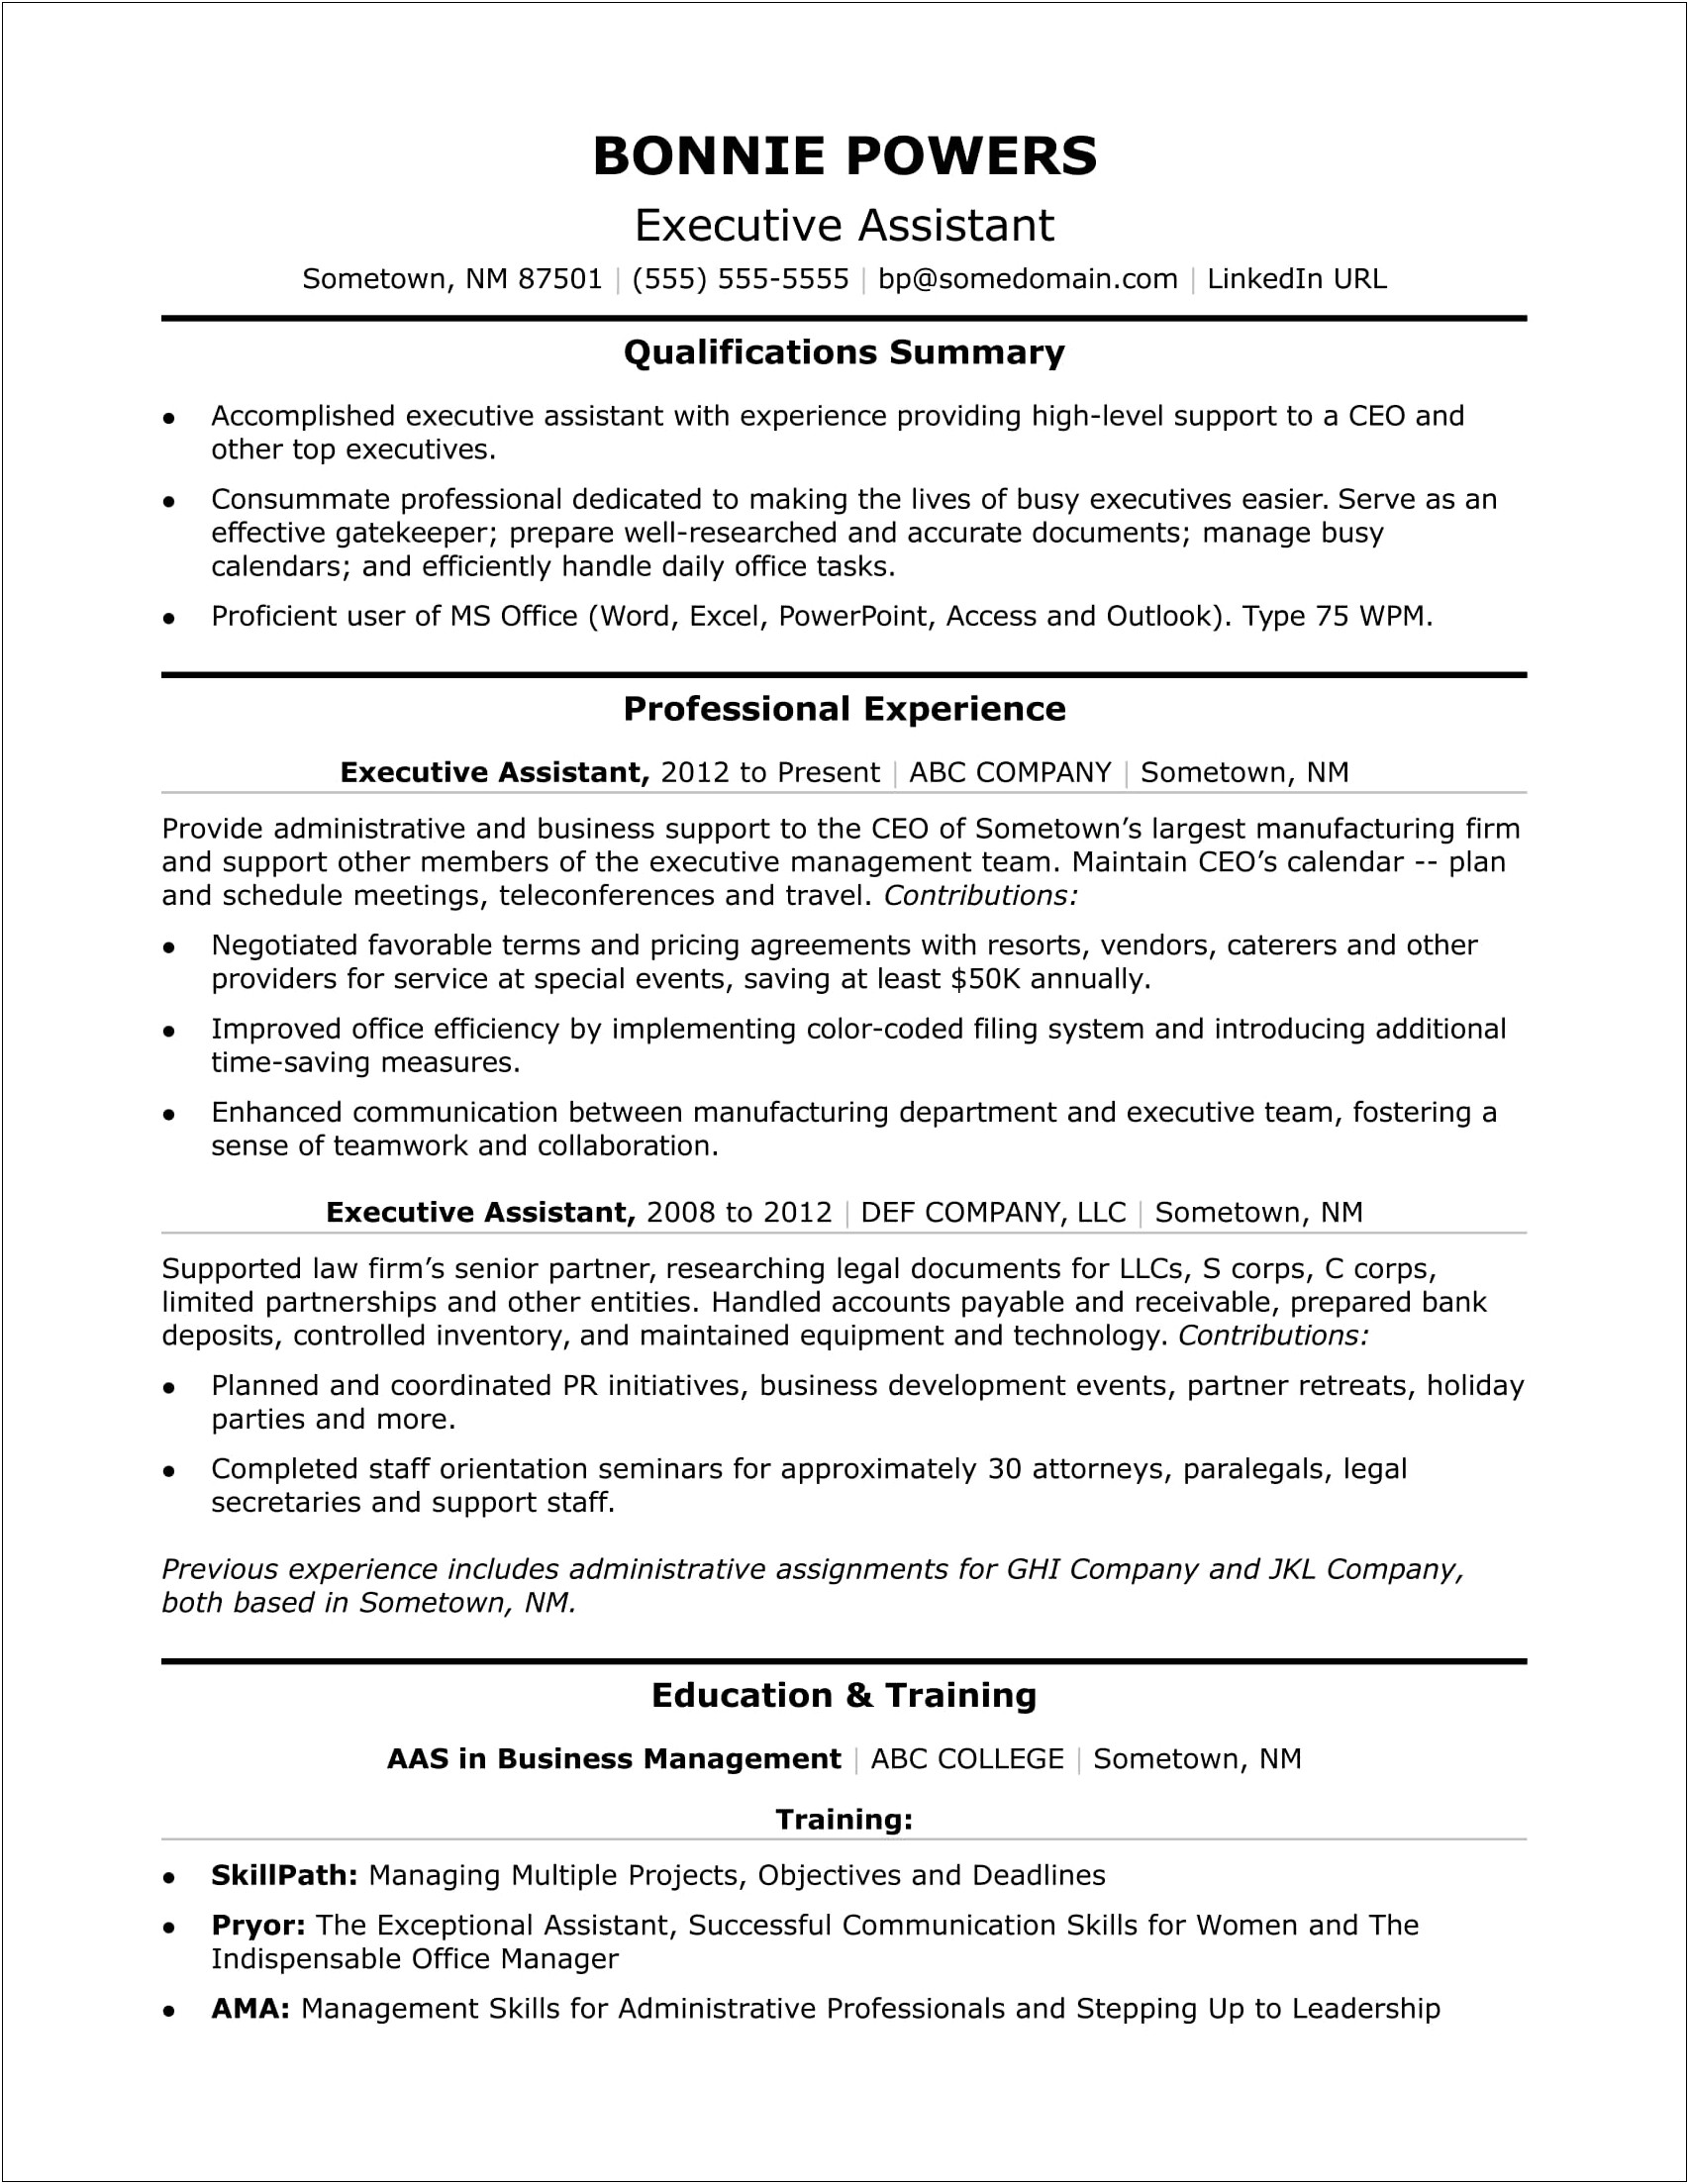 Resume Objective For Law Firm